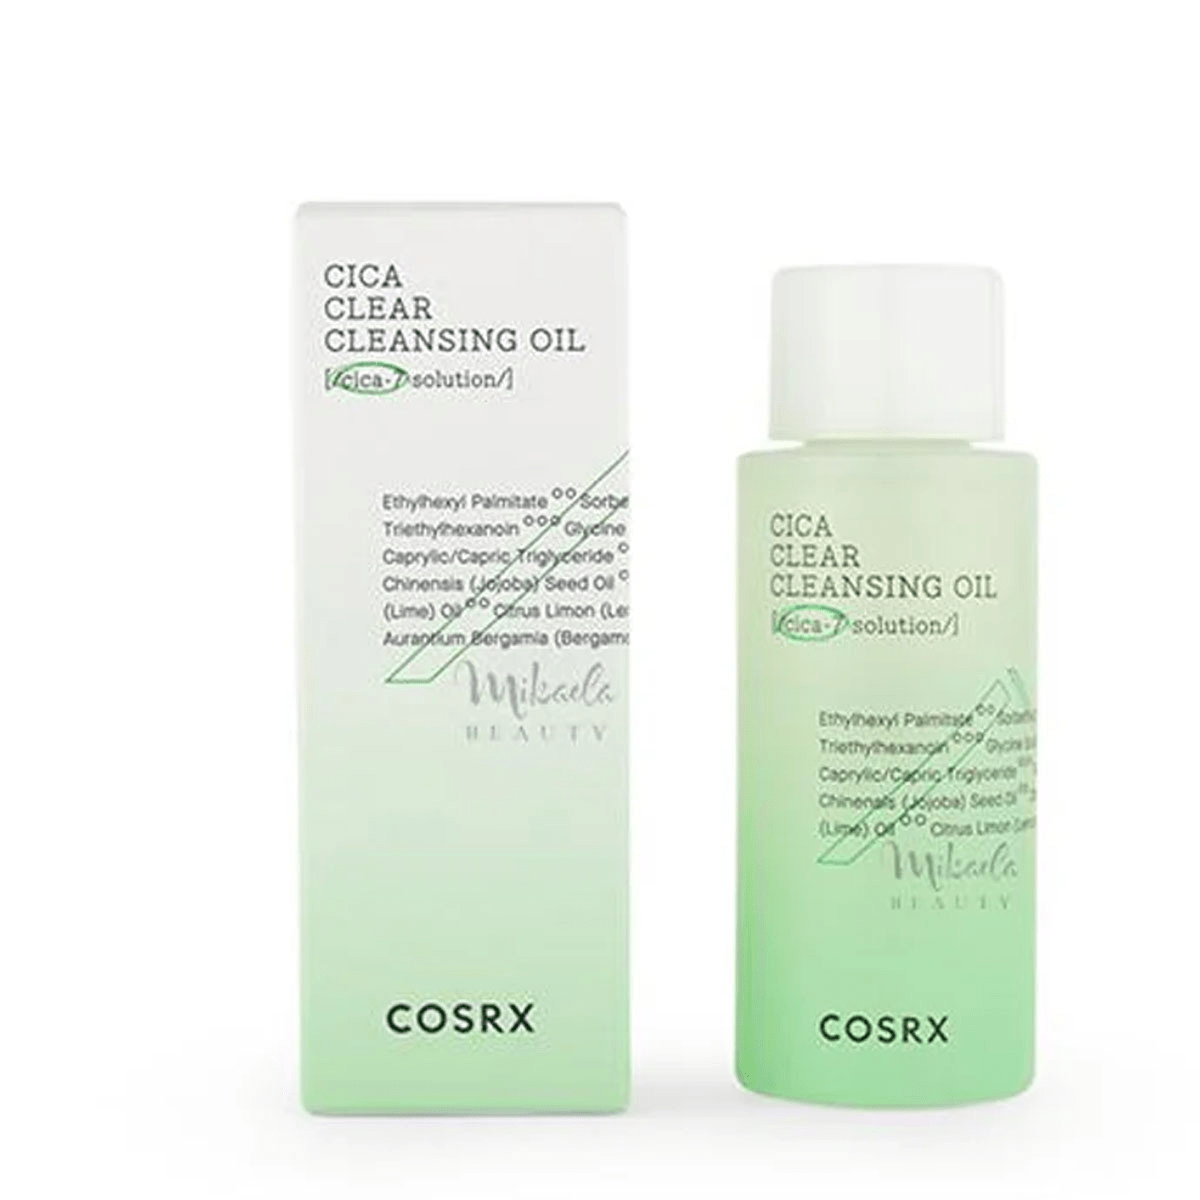 Cosrx - Cica Clear Cleansing Oil 50ml In Pakistan